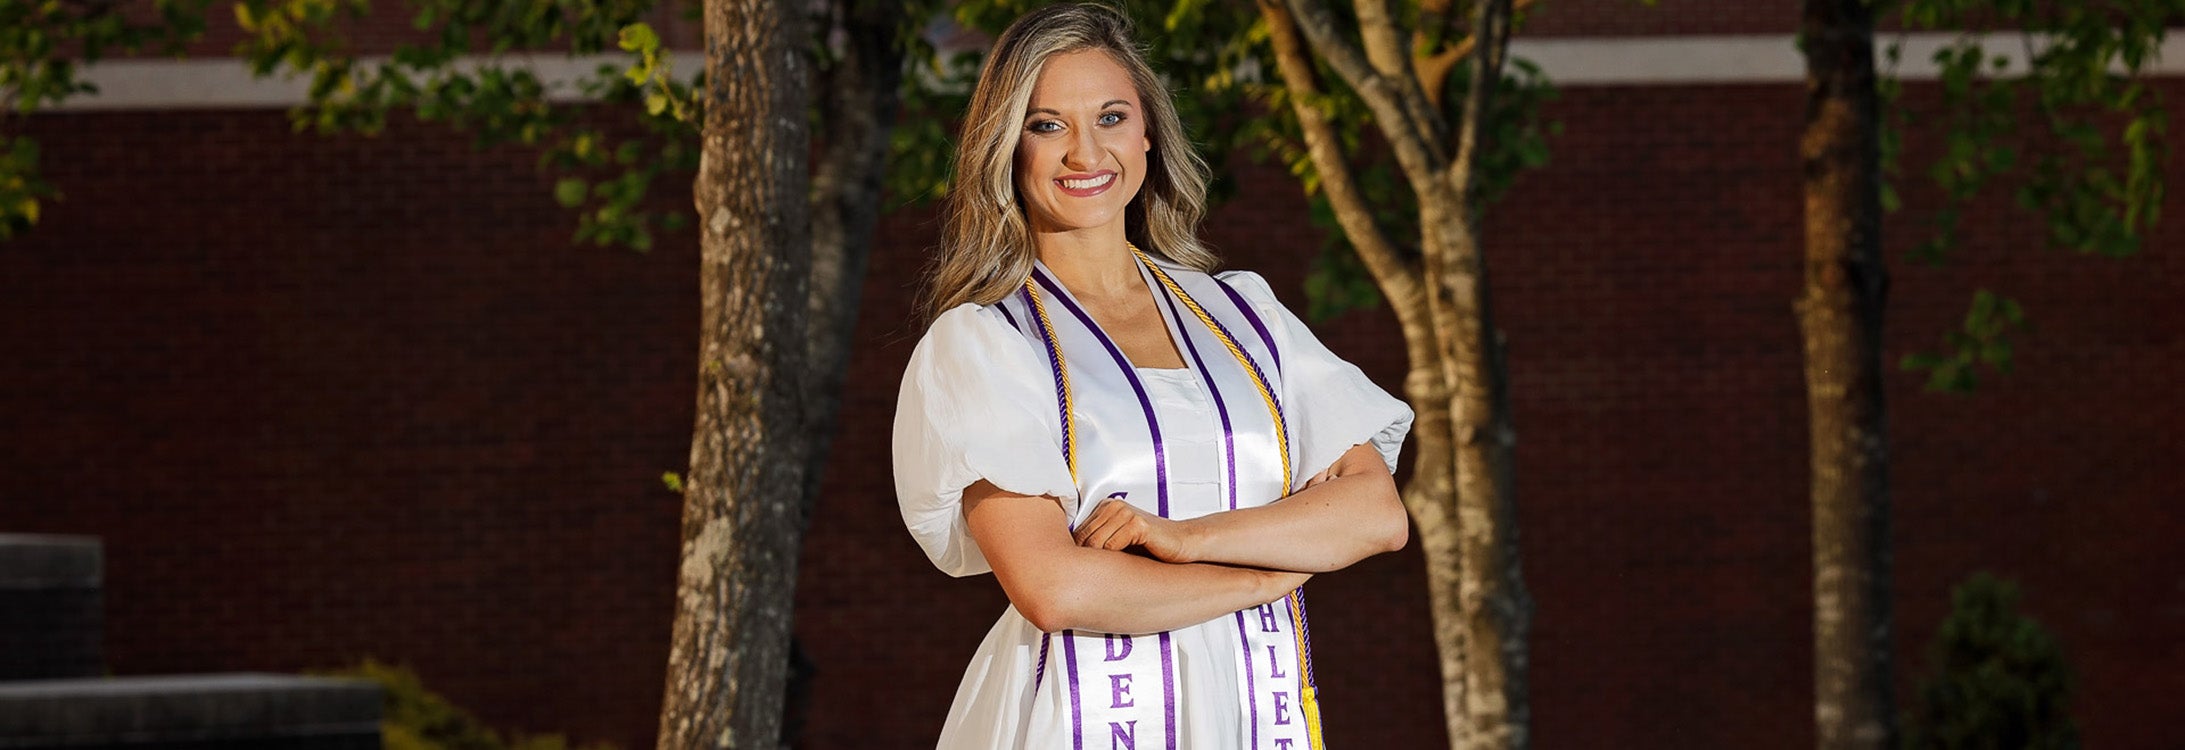 East Carolina University graduating senior Hunter Holland credits the support at ECU for helping her reach the finish line.